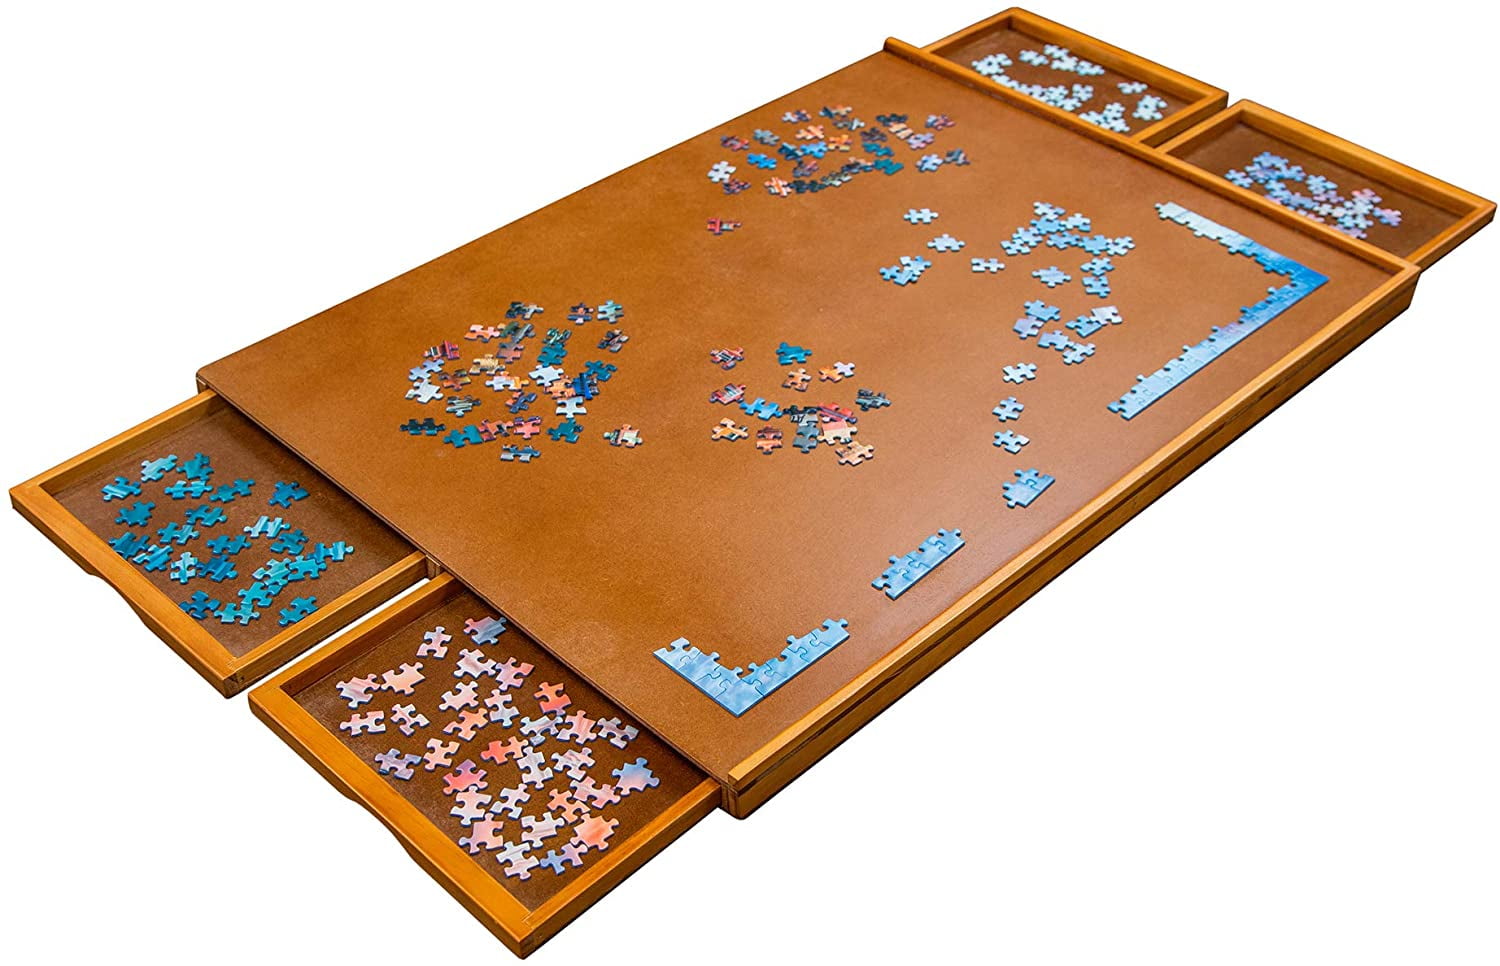 Details about   29.5" x 21.5" Wooden Jigsaw Puzzles Board Jumbl Puzzle Education Table Game Gift 